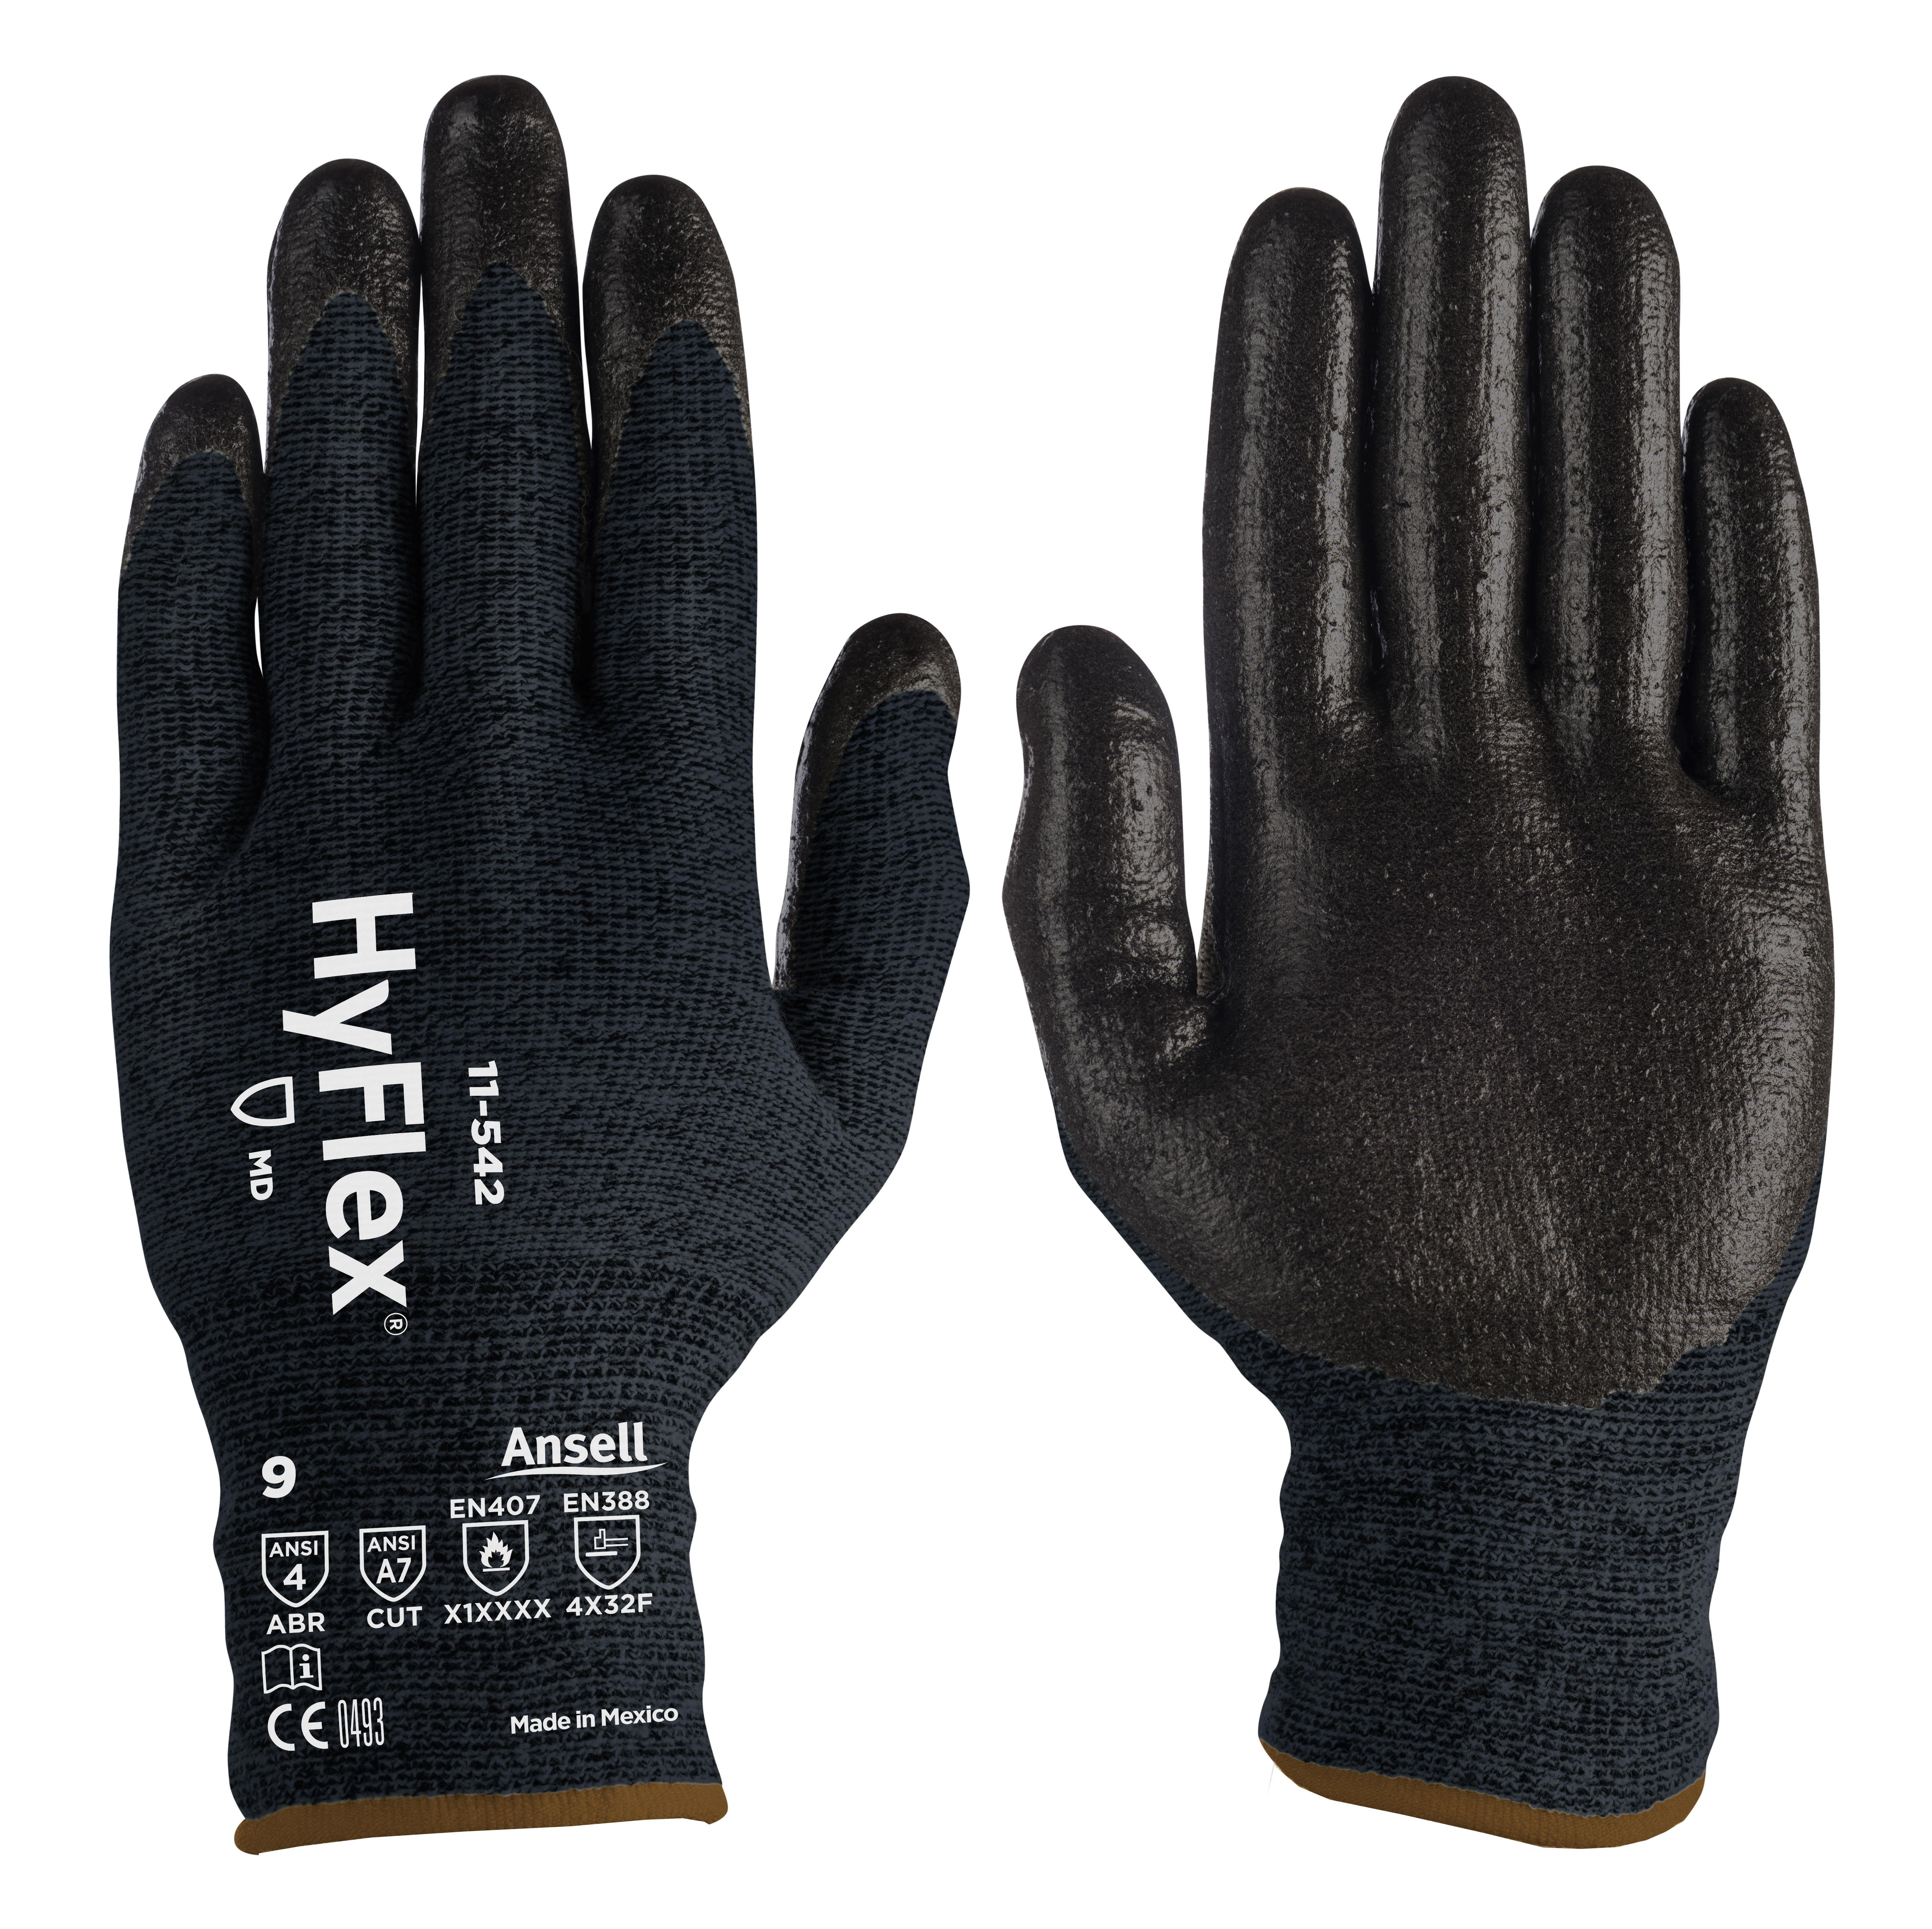 ANSELL HYFLEX 11-542 NITRILE COATED - Heat Resistant Gloves